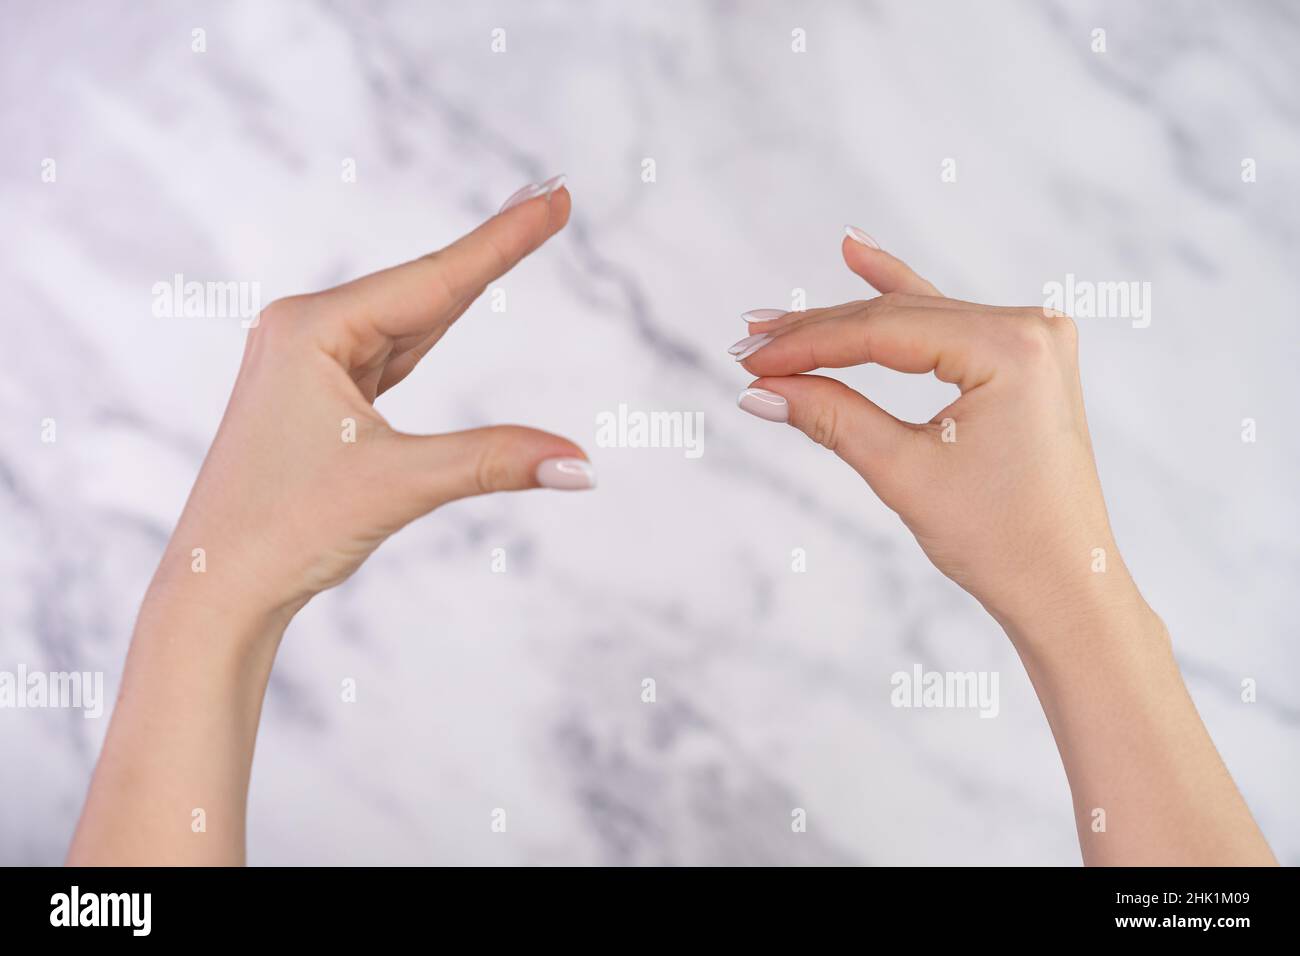 Woman showing bla-bla-bla gesture with hands isolated on marble light background. Empty promises, blah concept. Lier. Stock Photo